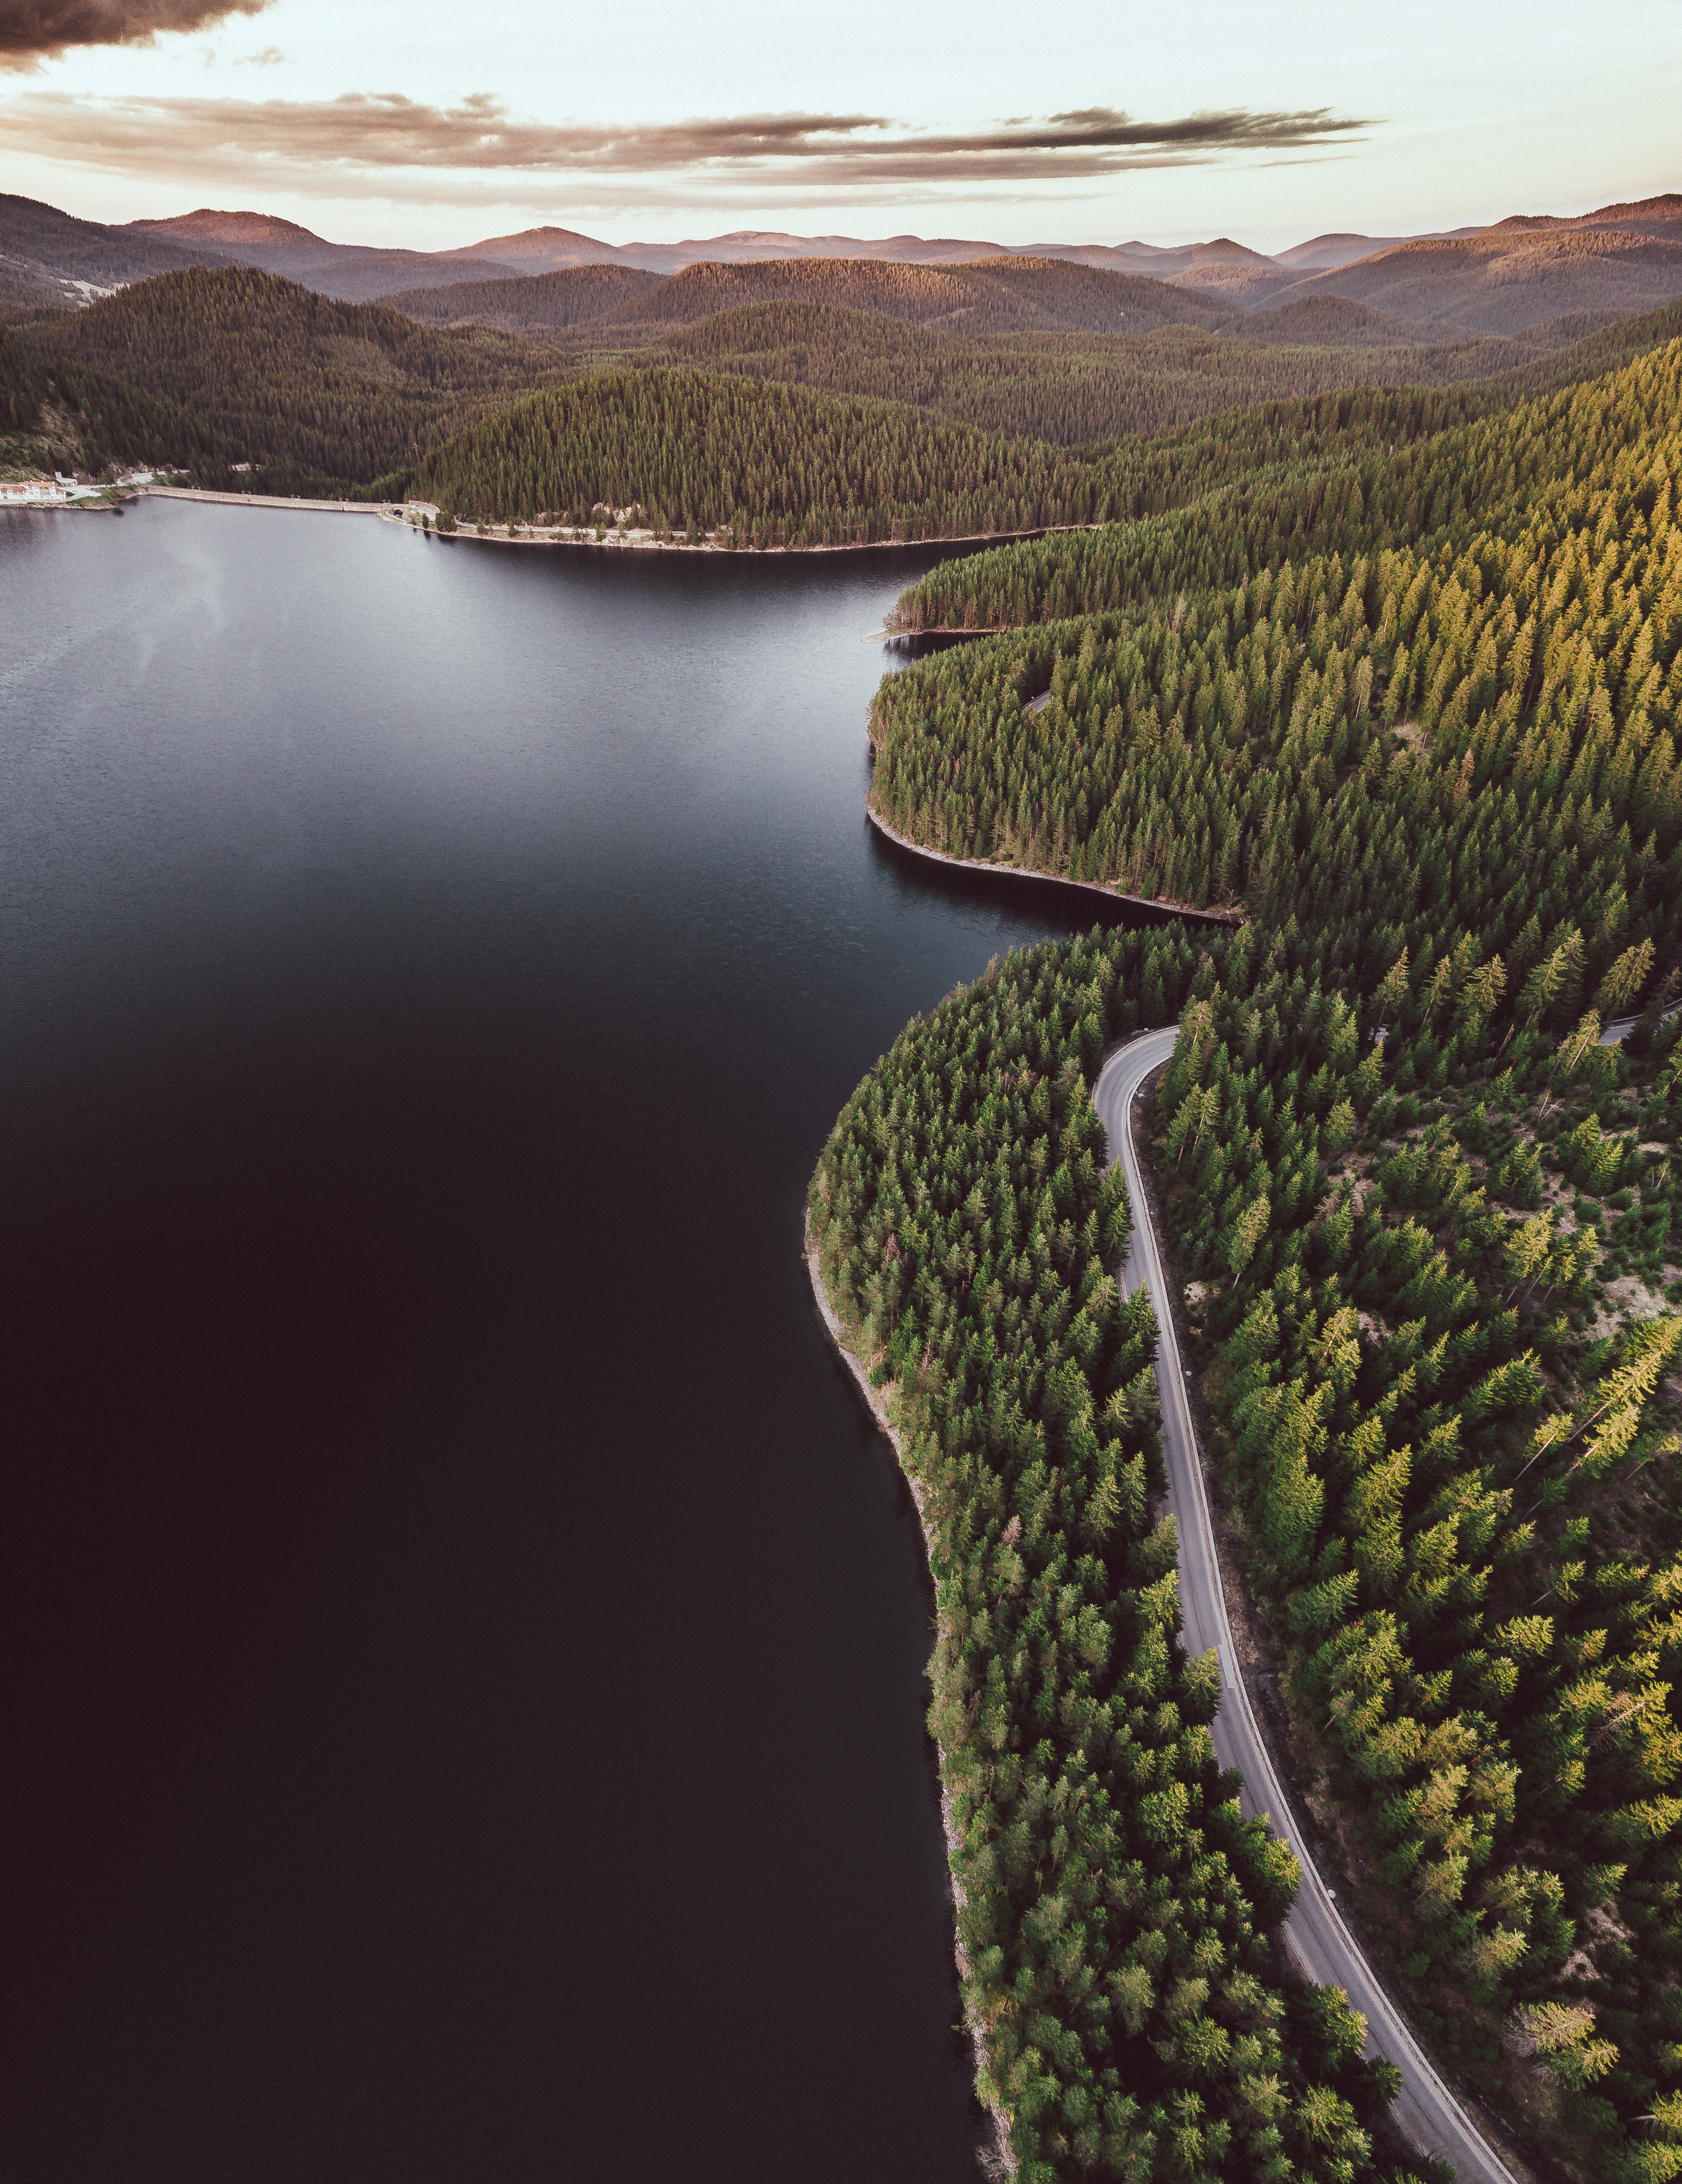 shore, nature, view from above, lake, bank, road, forest, hills phone background